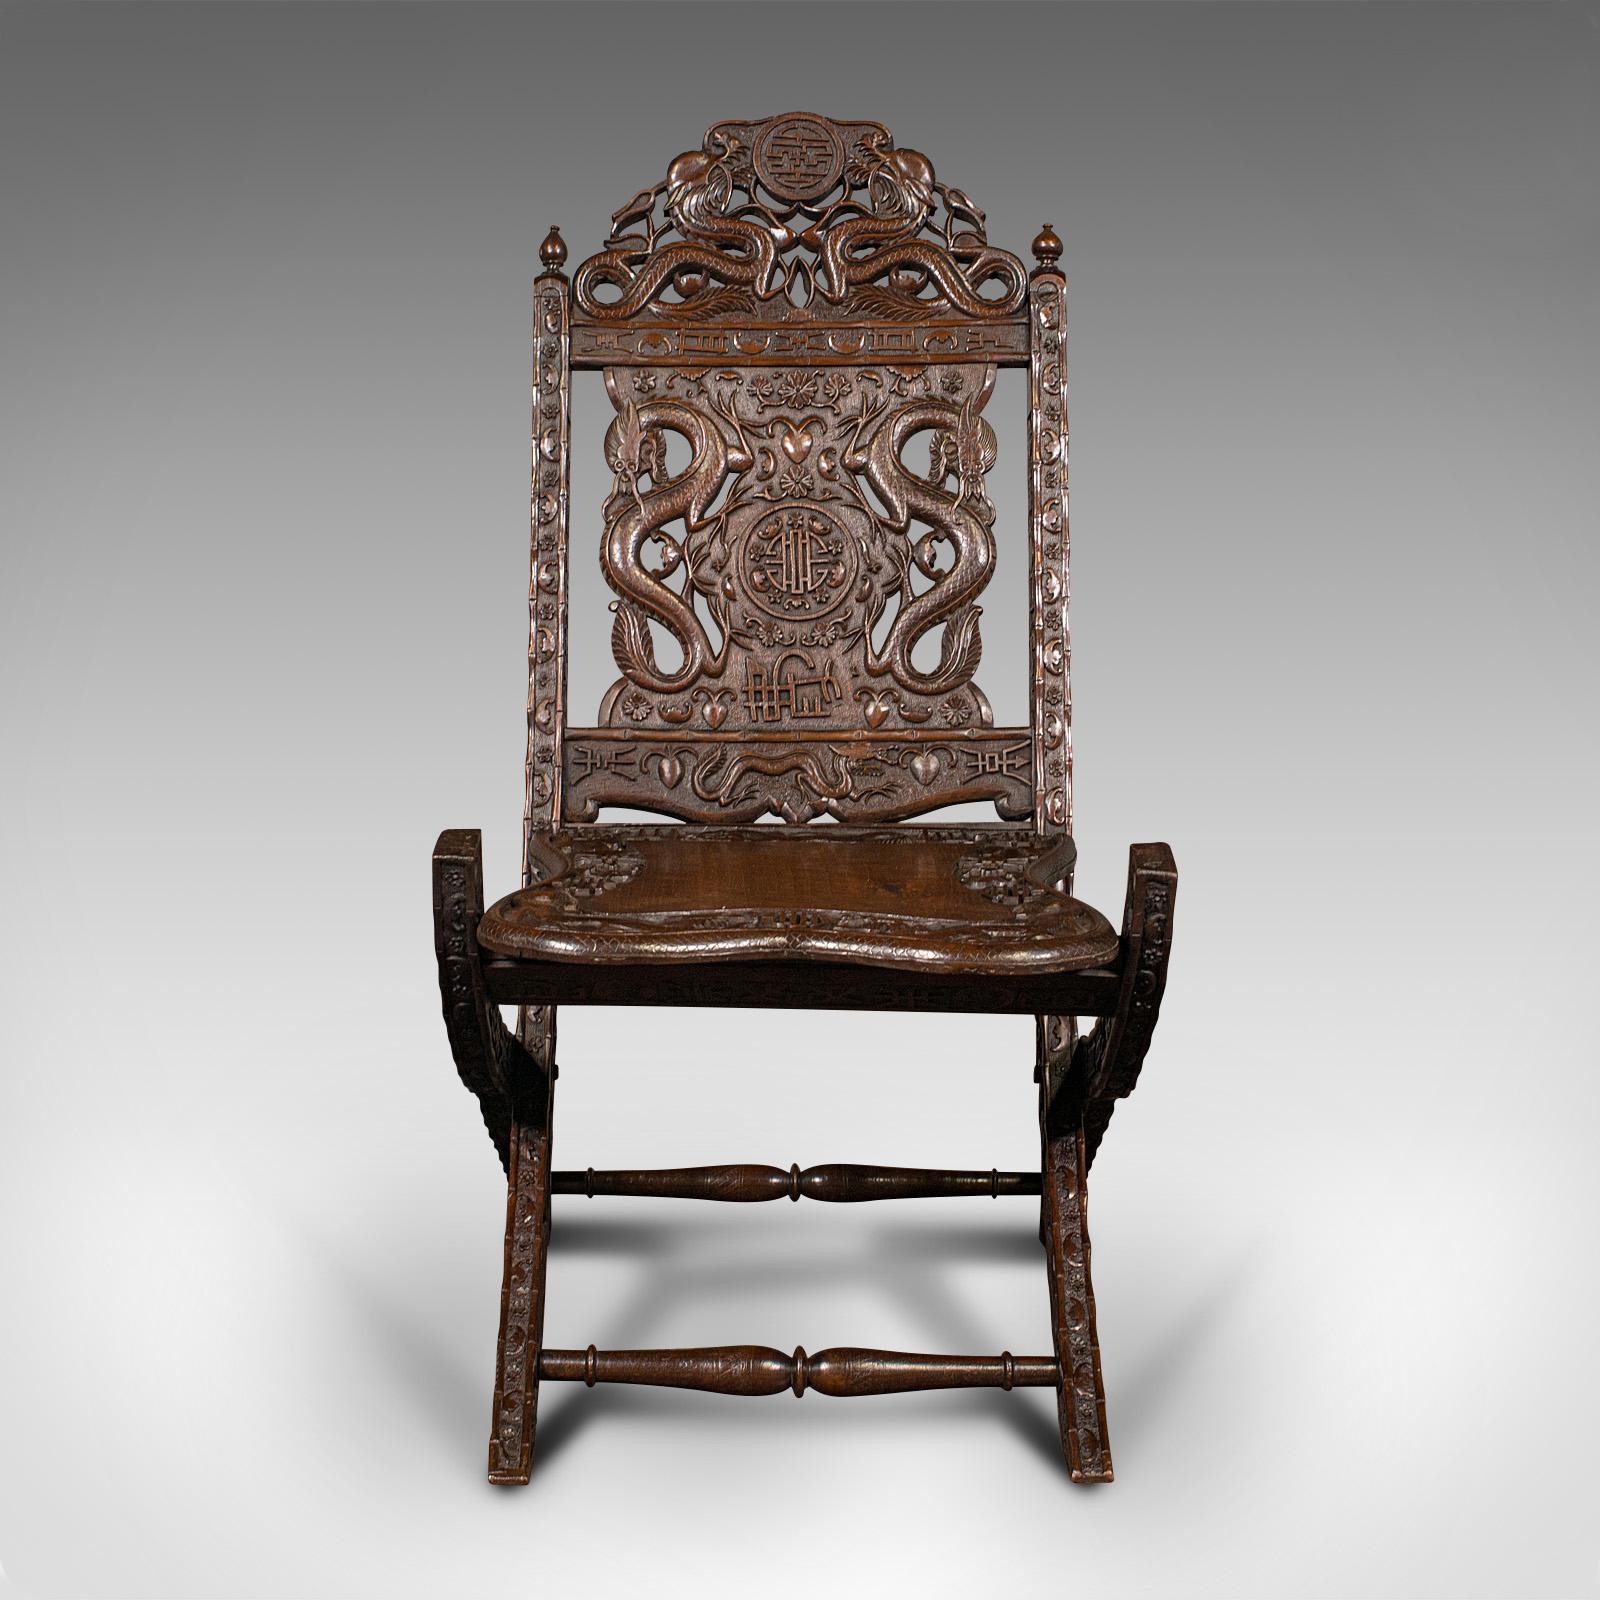 This is an antique campaign chair. A Chinese, carved mahogany folding colonial seat, dating to the early Victorian period, circa 1850.

Superb, decorative campaign chair, with strong 19th century Oriental taste
Displays a desirable aged patina